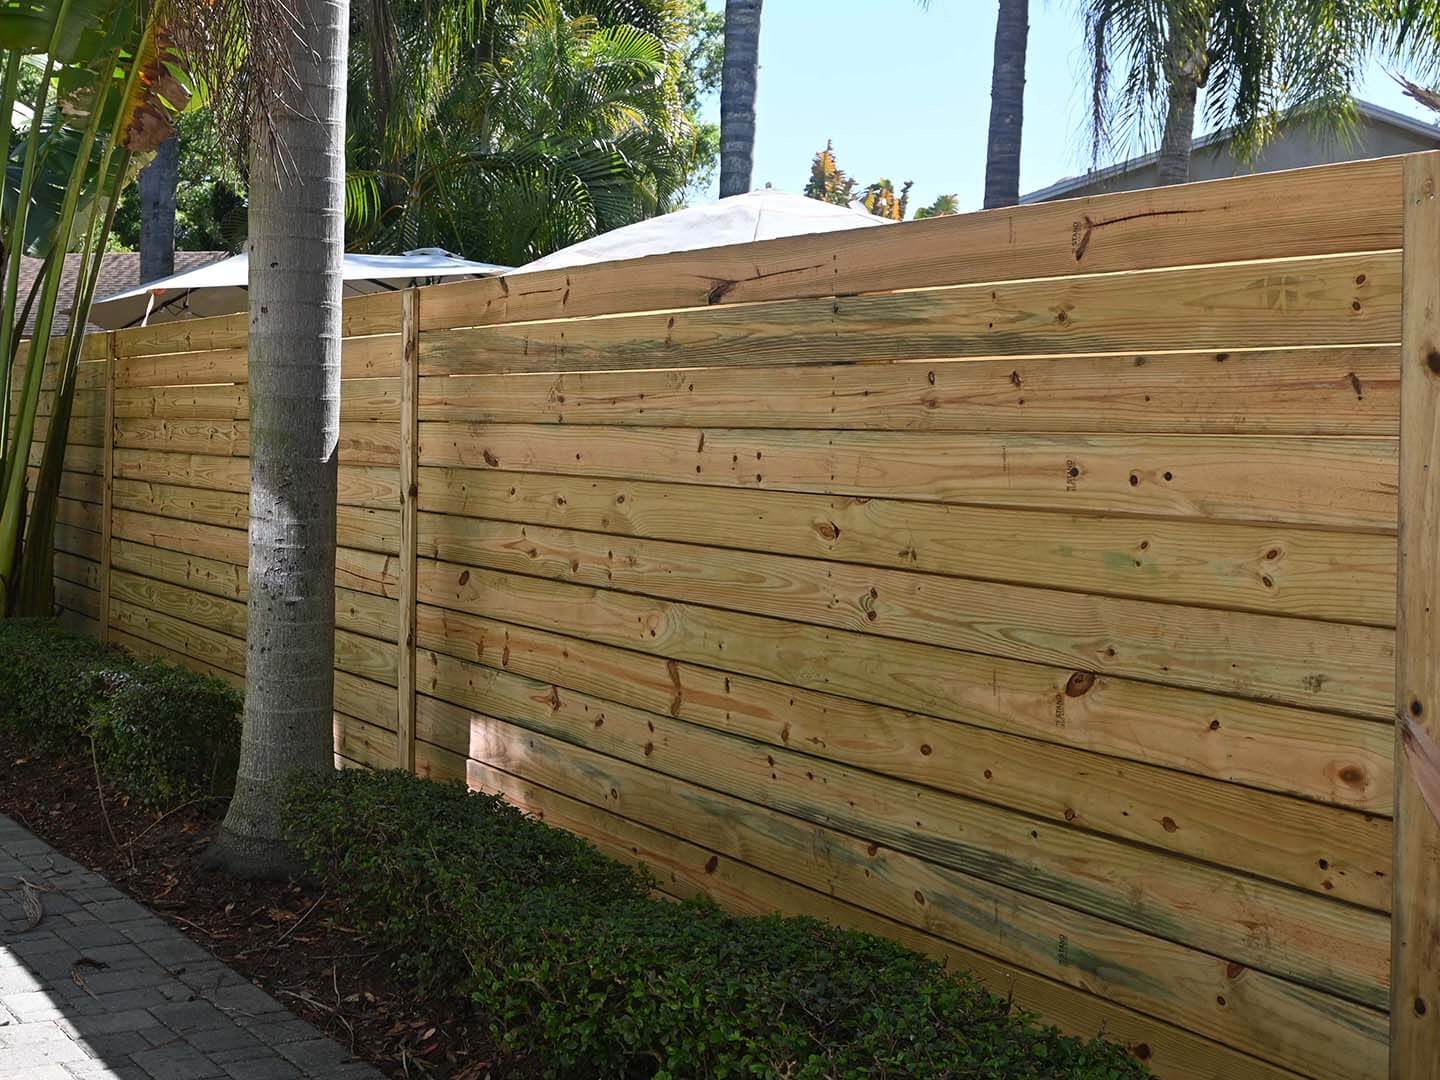 Wood fences in Tampa Florida are beautiful